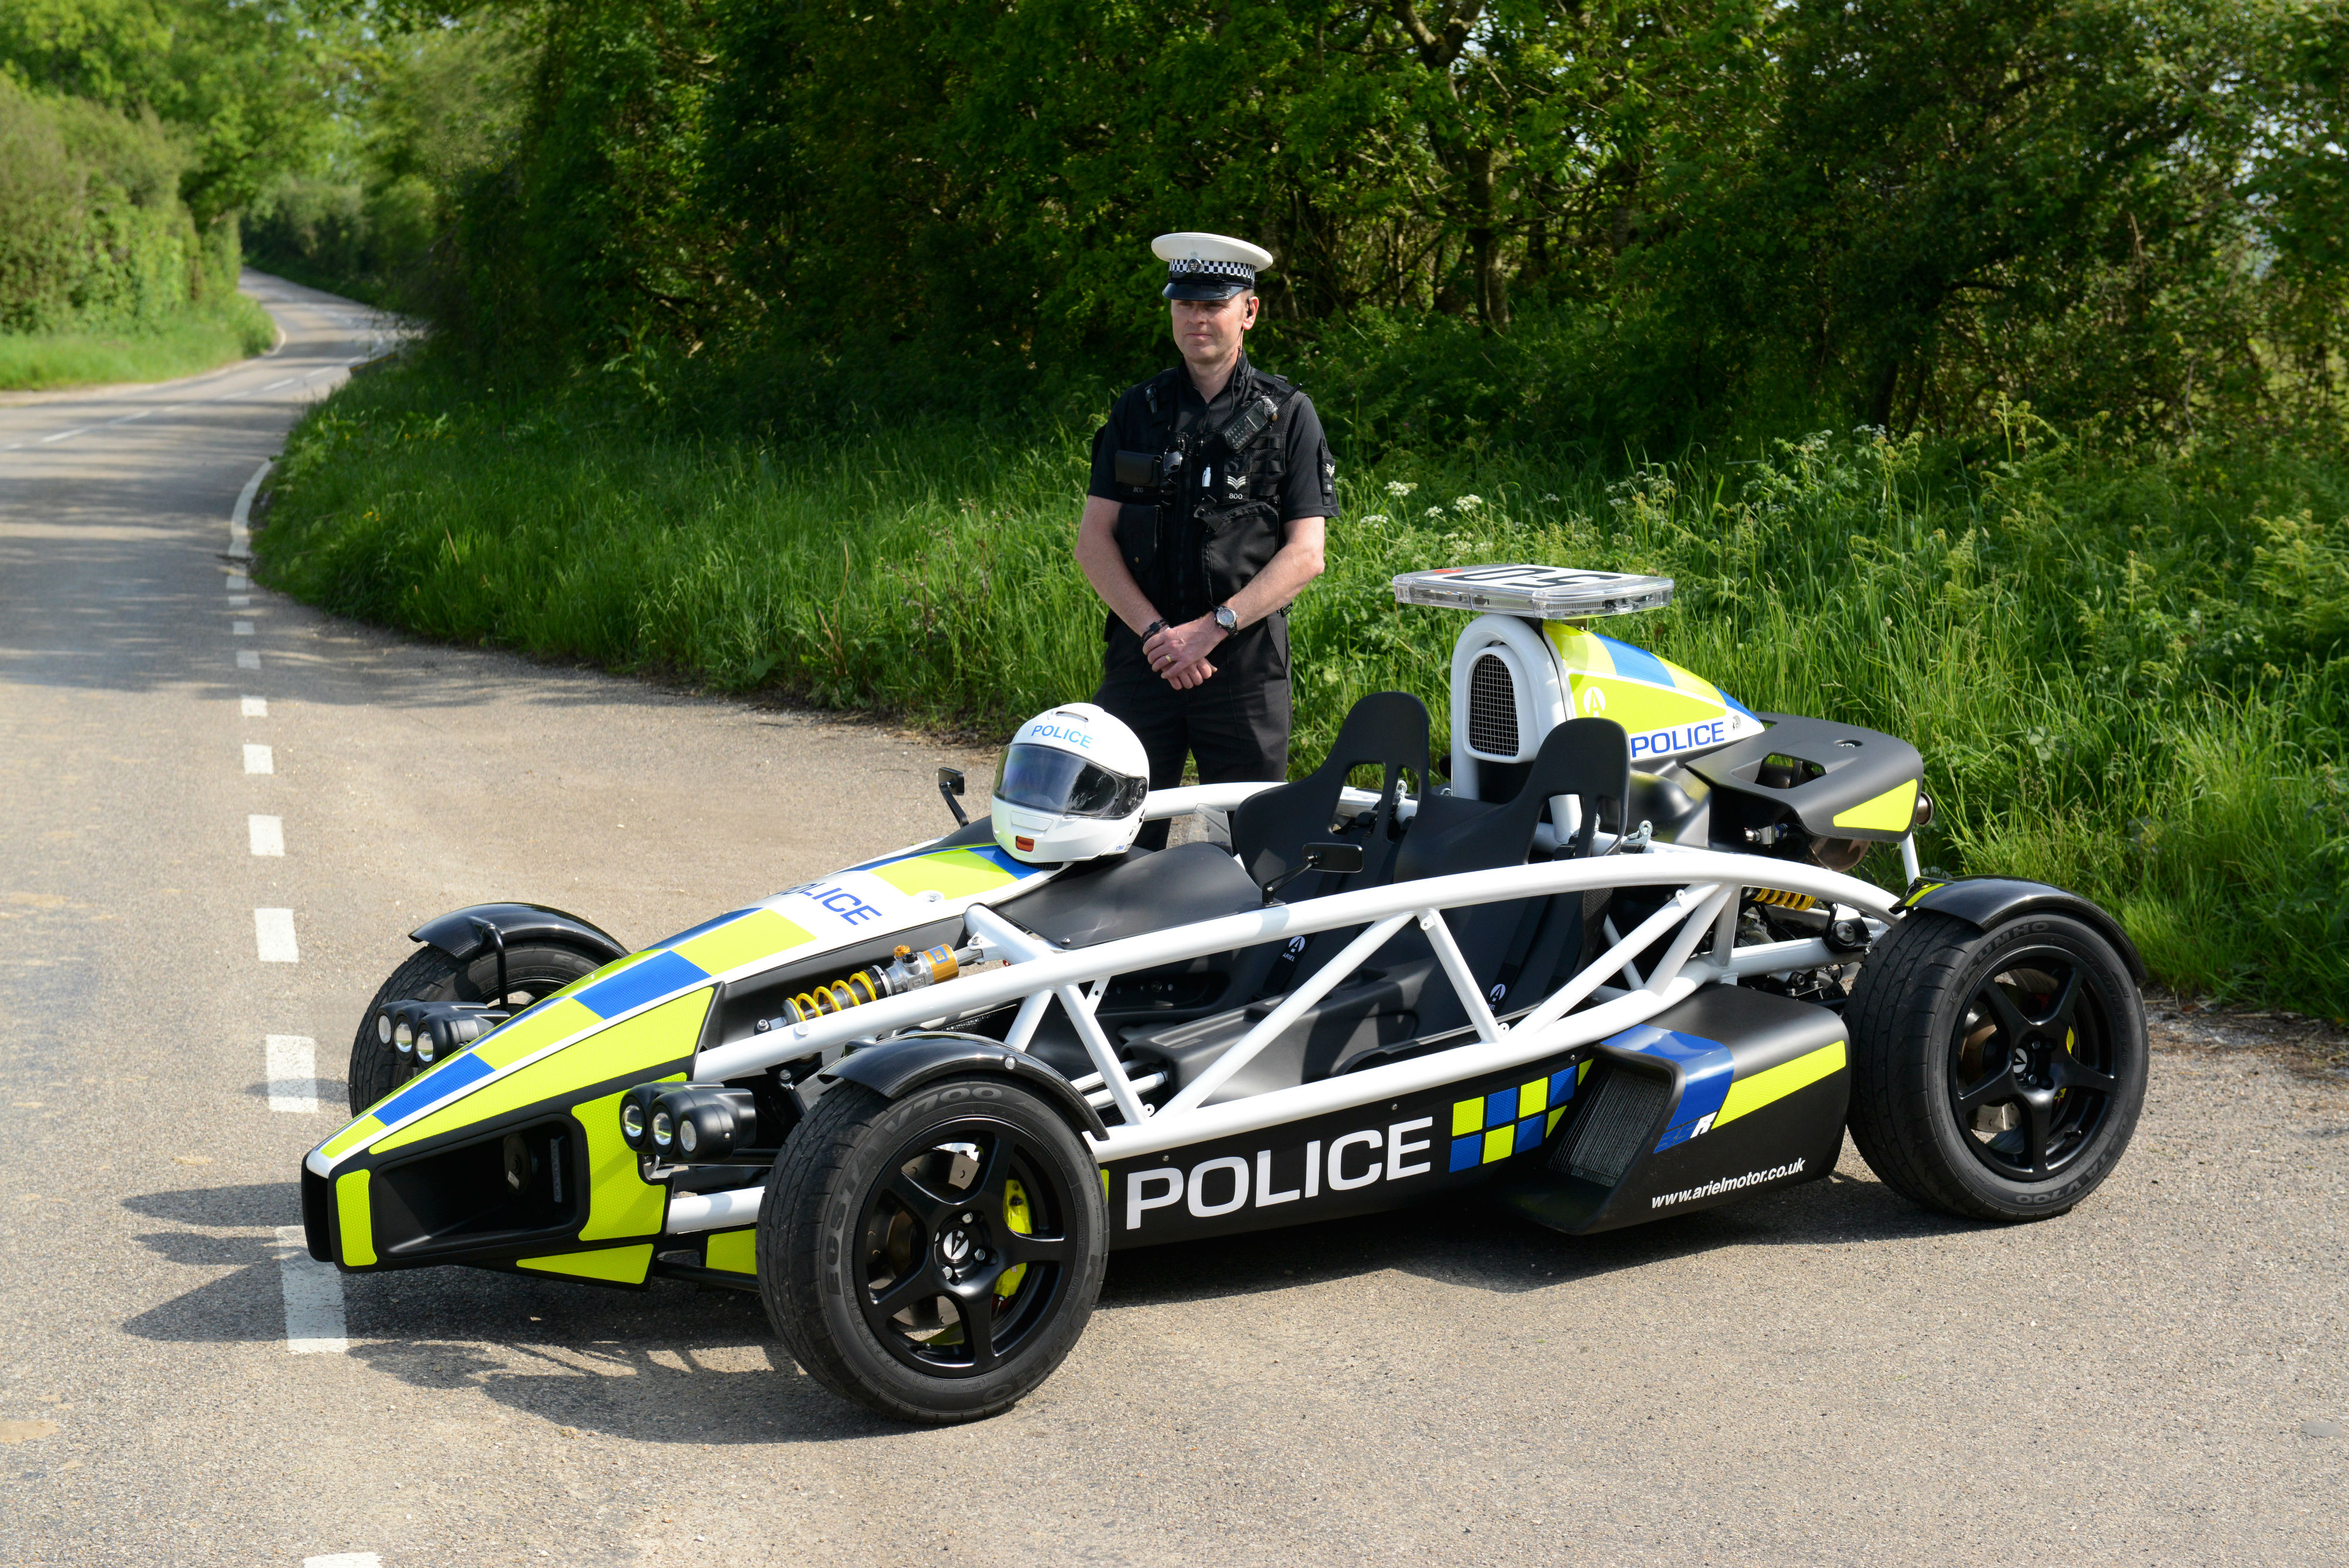 Police draft in 350bhp Ariel Atom for motorcycle operation